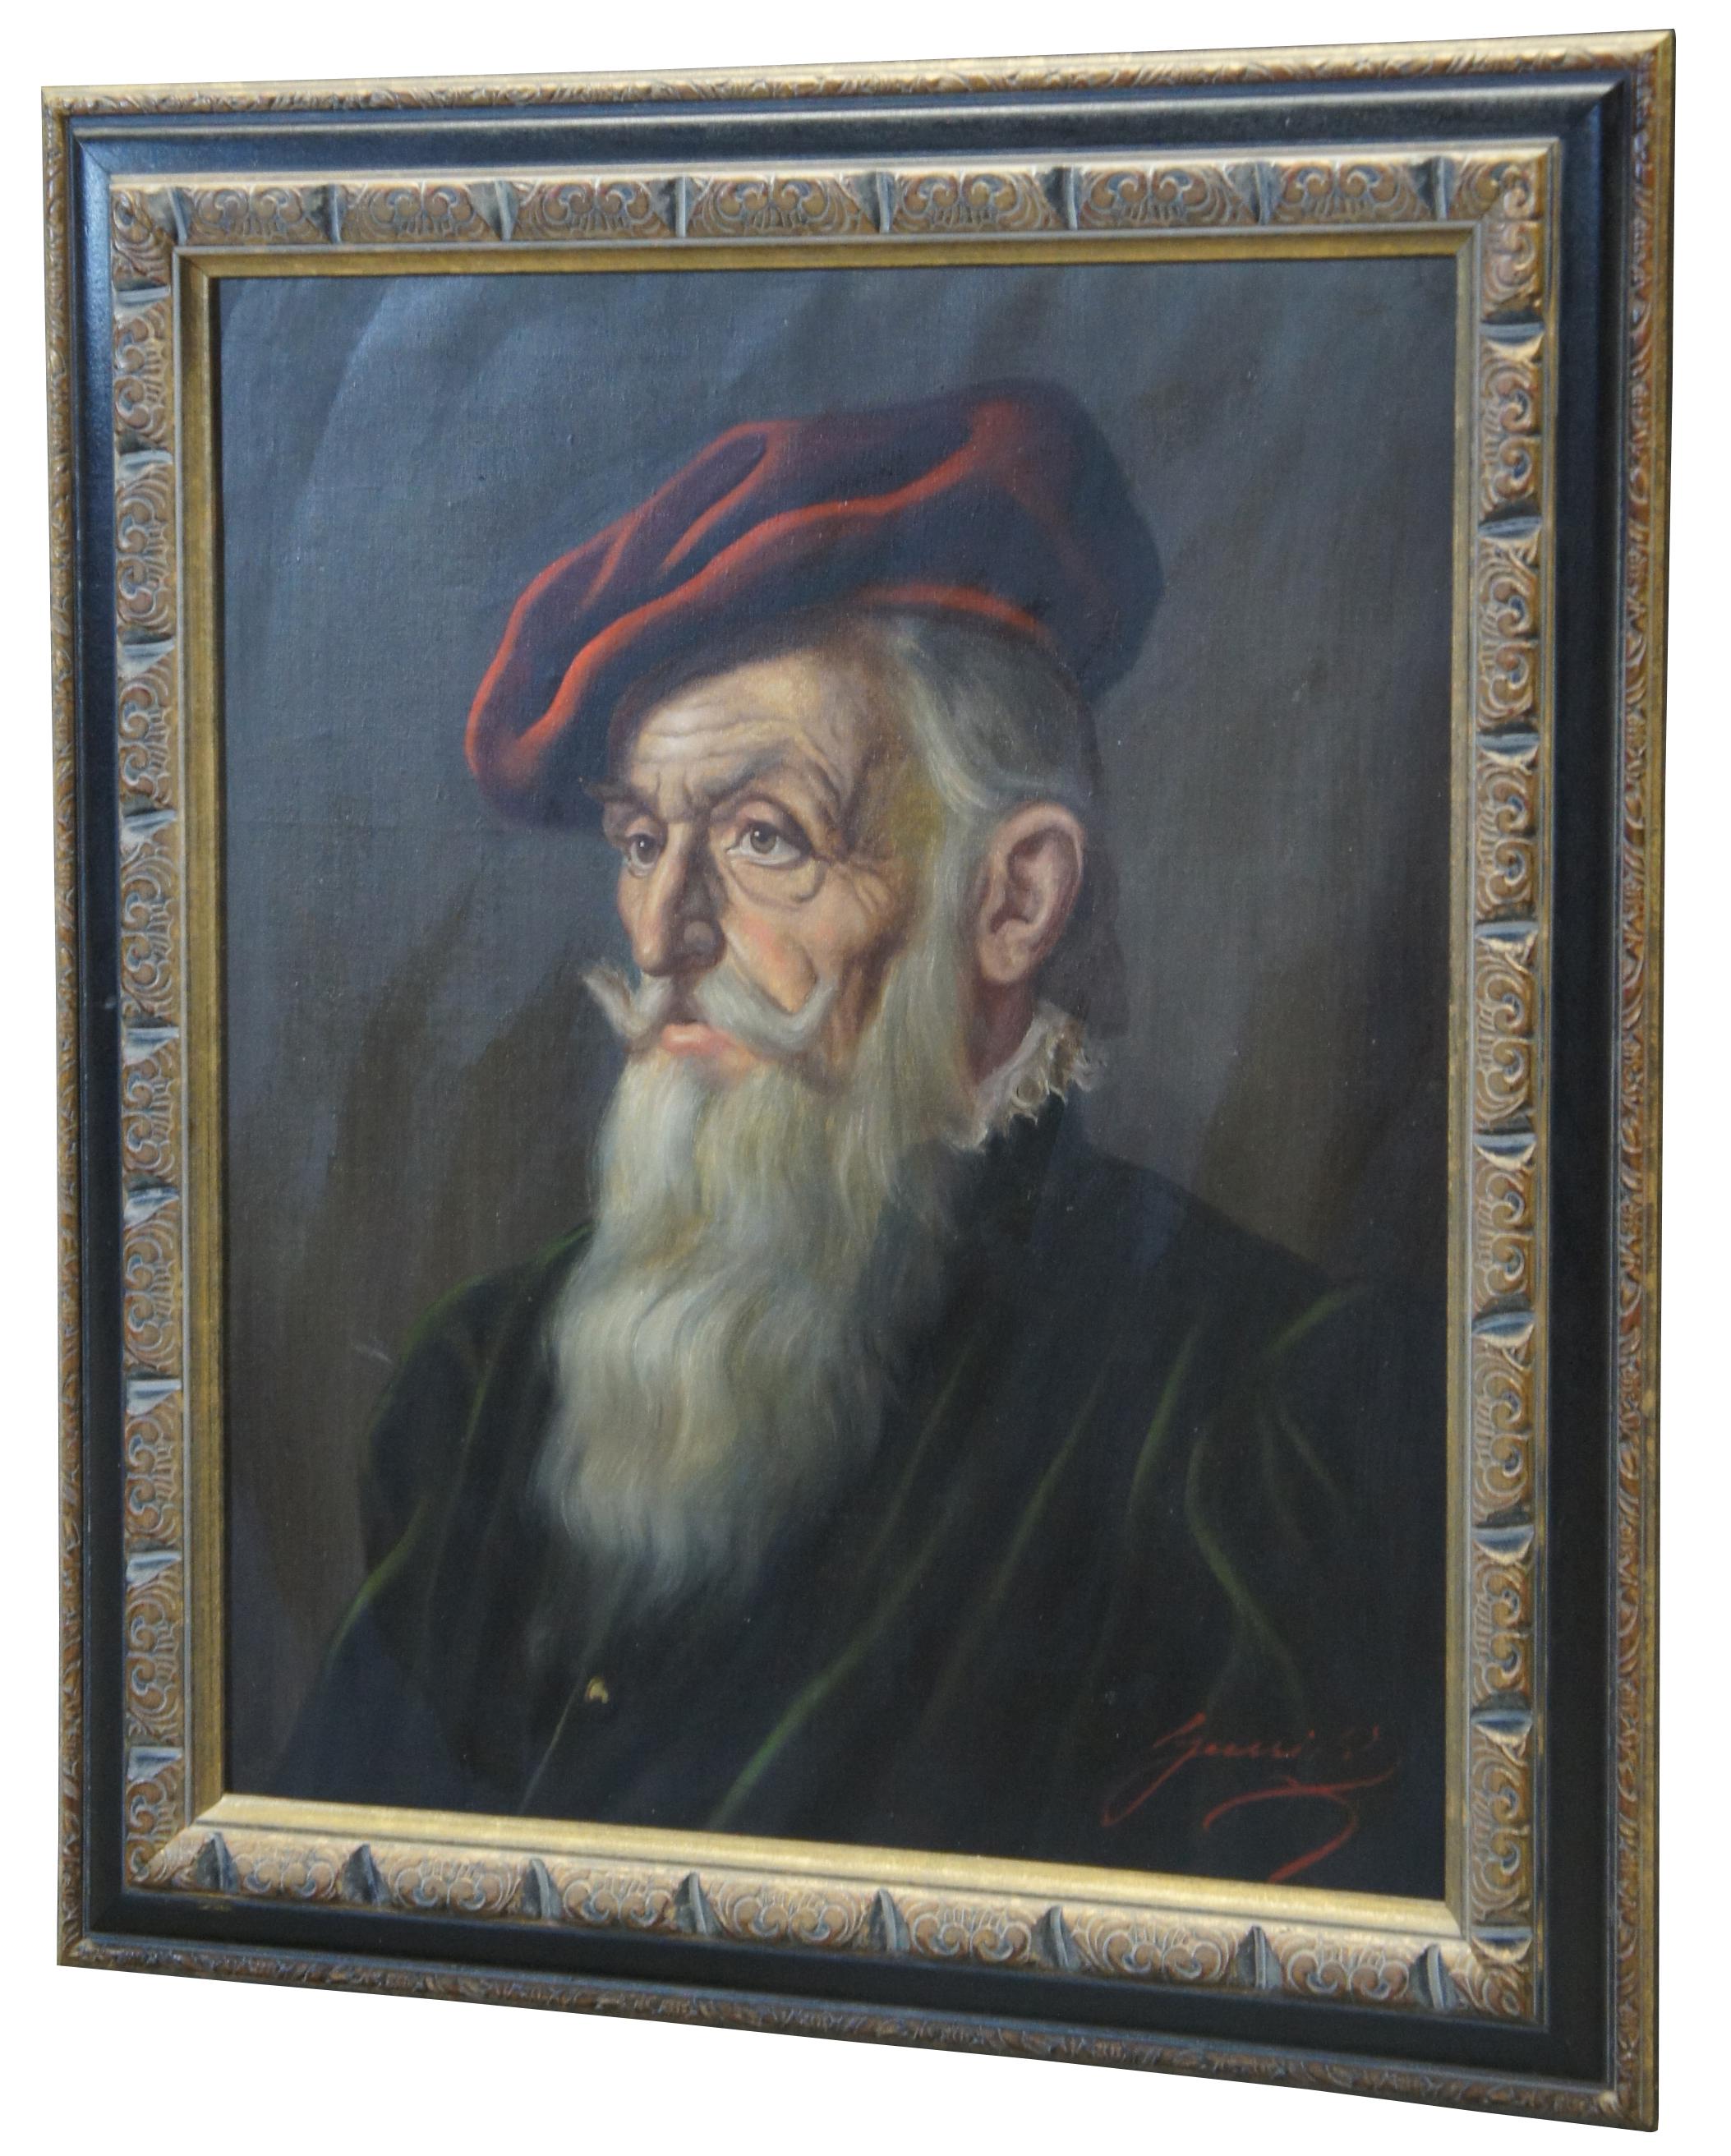 Vintage 20th century oil on canvas painting by Hungarian artist Jeno Gussich (1905 -), showing an old man with white hair and beard, wearing a dark green velvet smock with an Elizabethan style lace collar and red beret.

Measures: 25.25” x 1” x